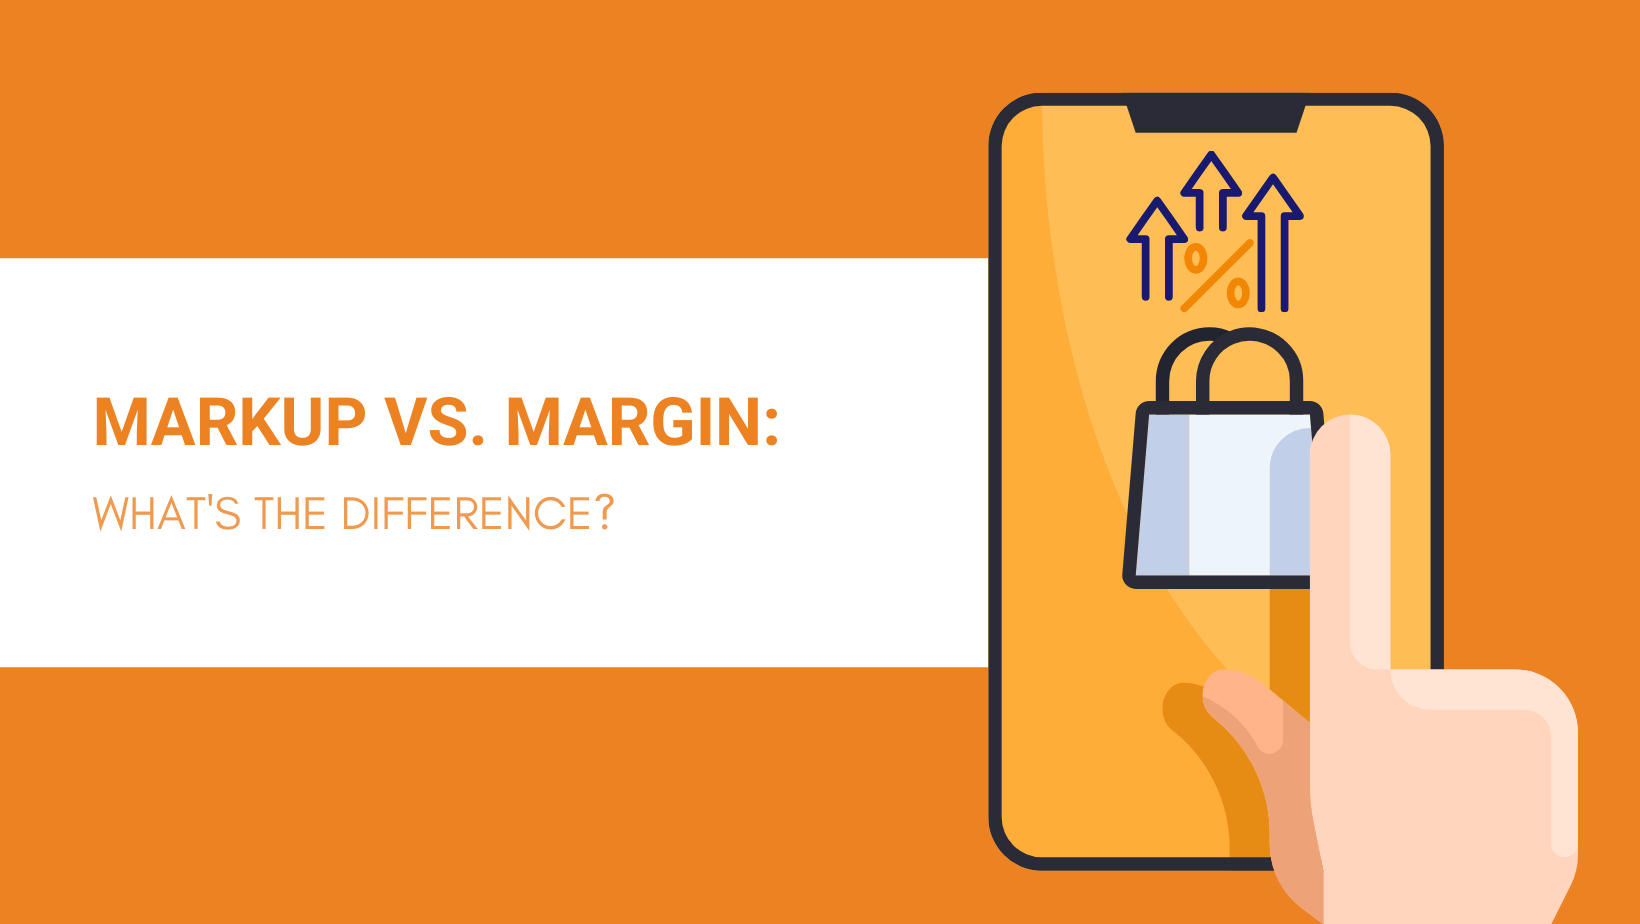 MARKUP VS. MARGIN WHAT'S THE DIFFERENCE